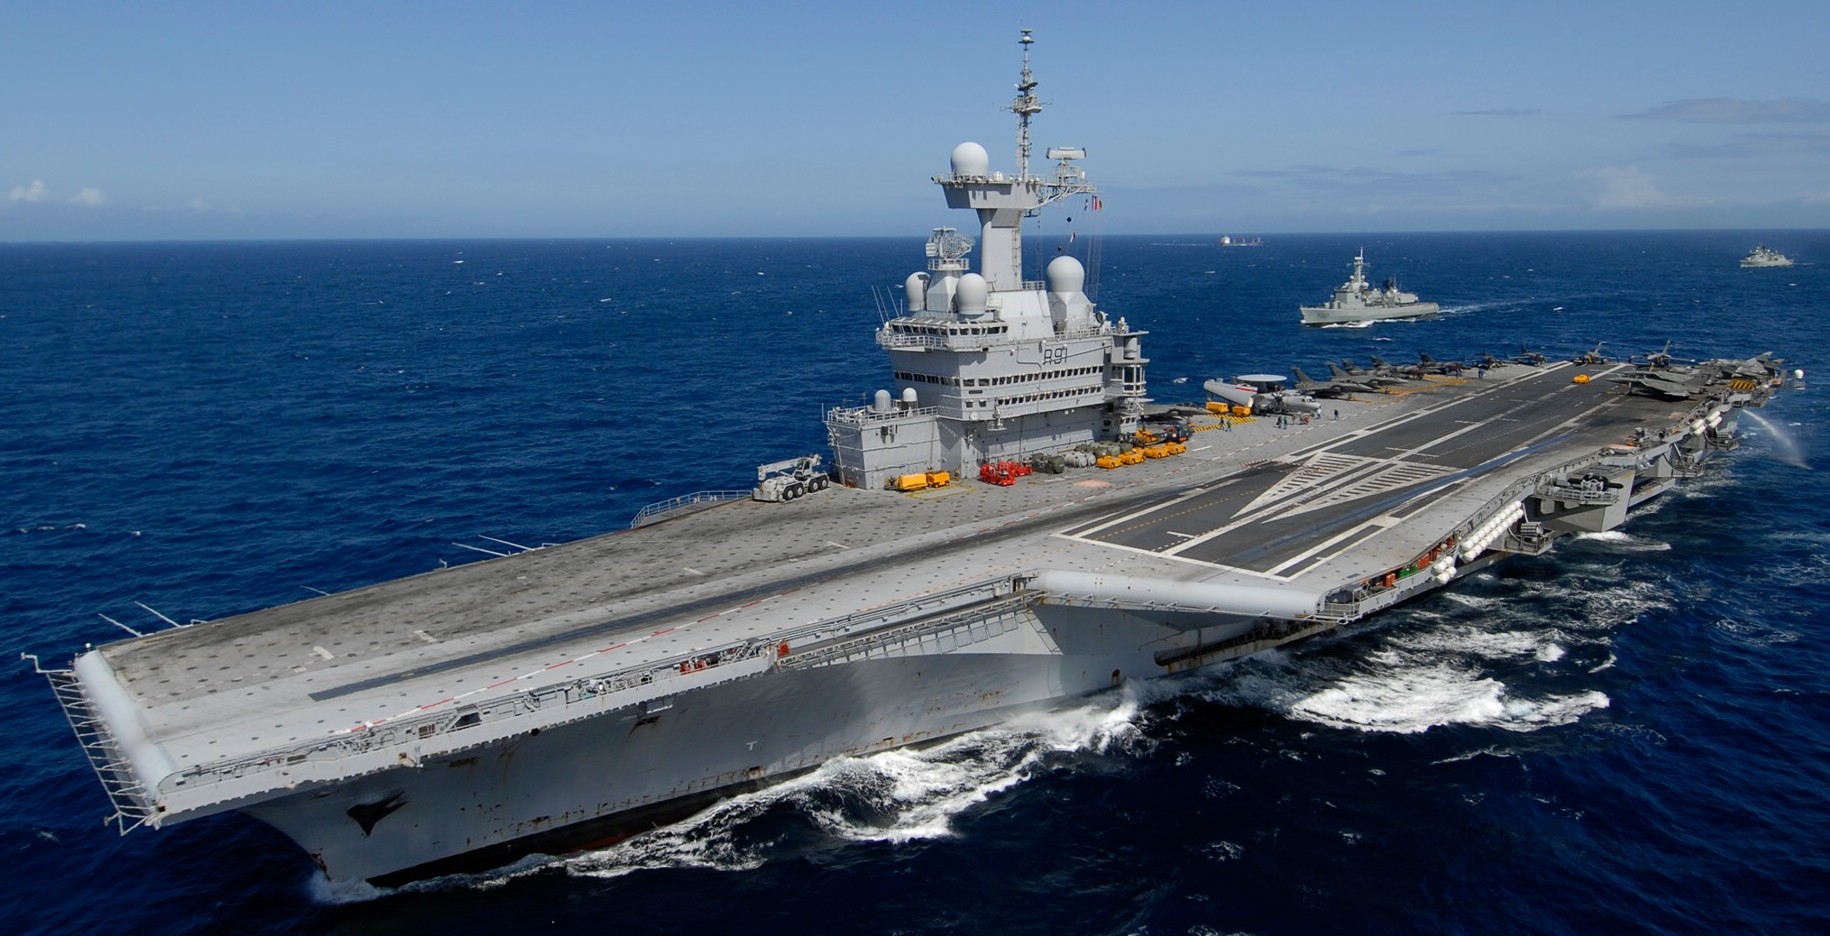 r-91 fs charles de gaulle aircraft carrier french navy porte avions 97